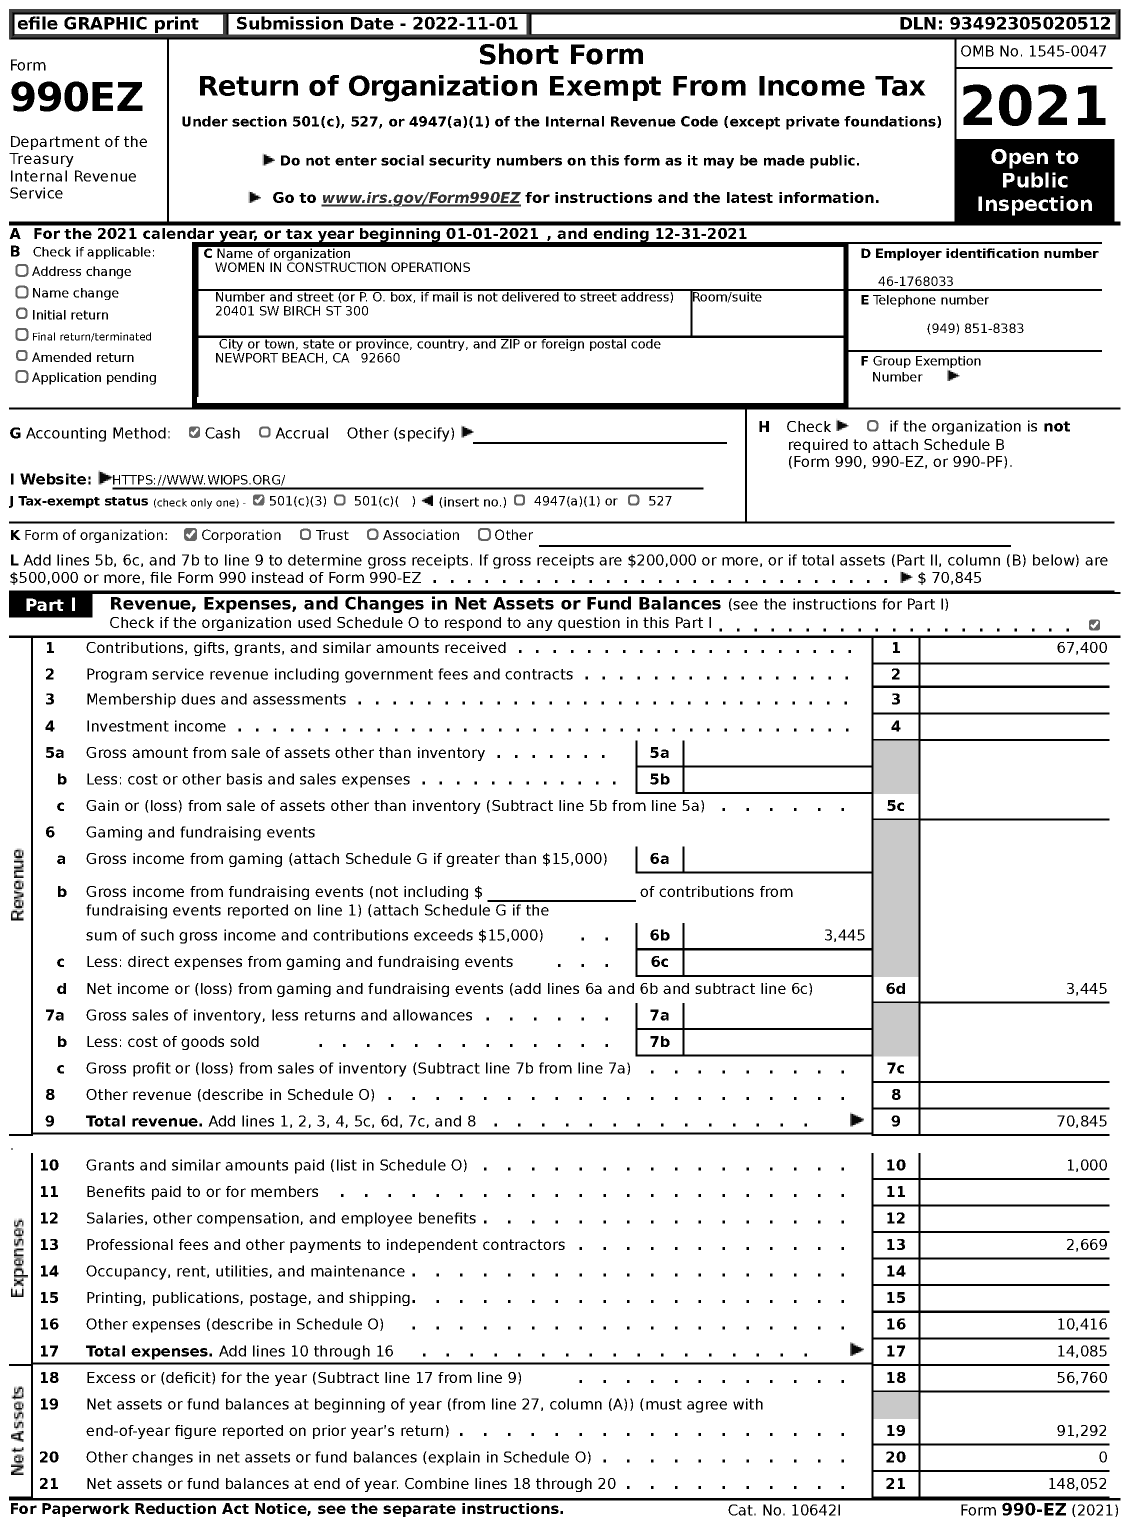 Image of first page of 2021 Form 990EZ for Women in Construction Operations